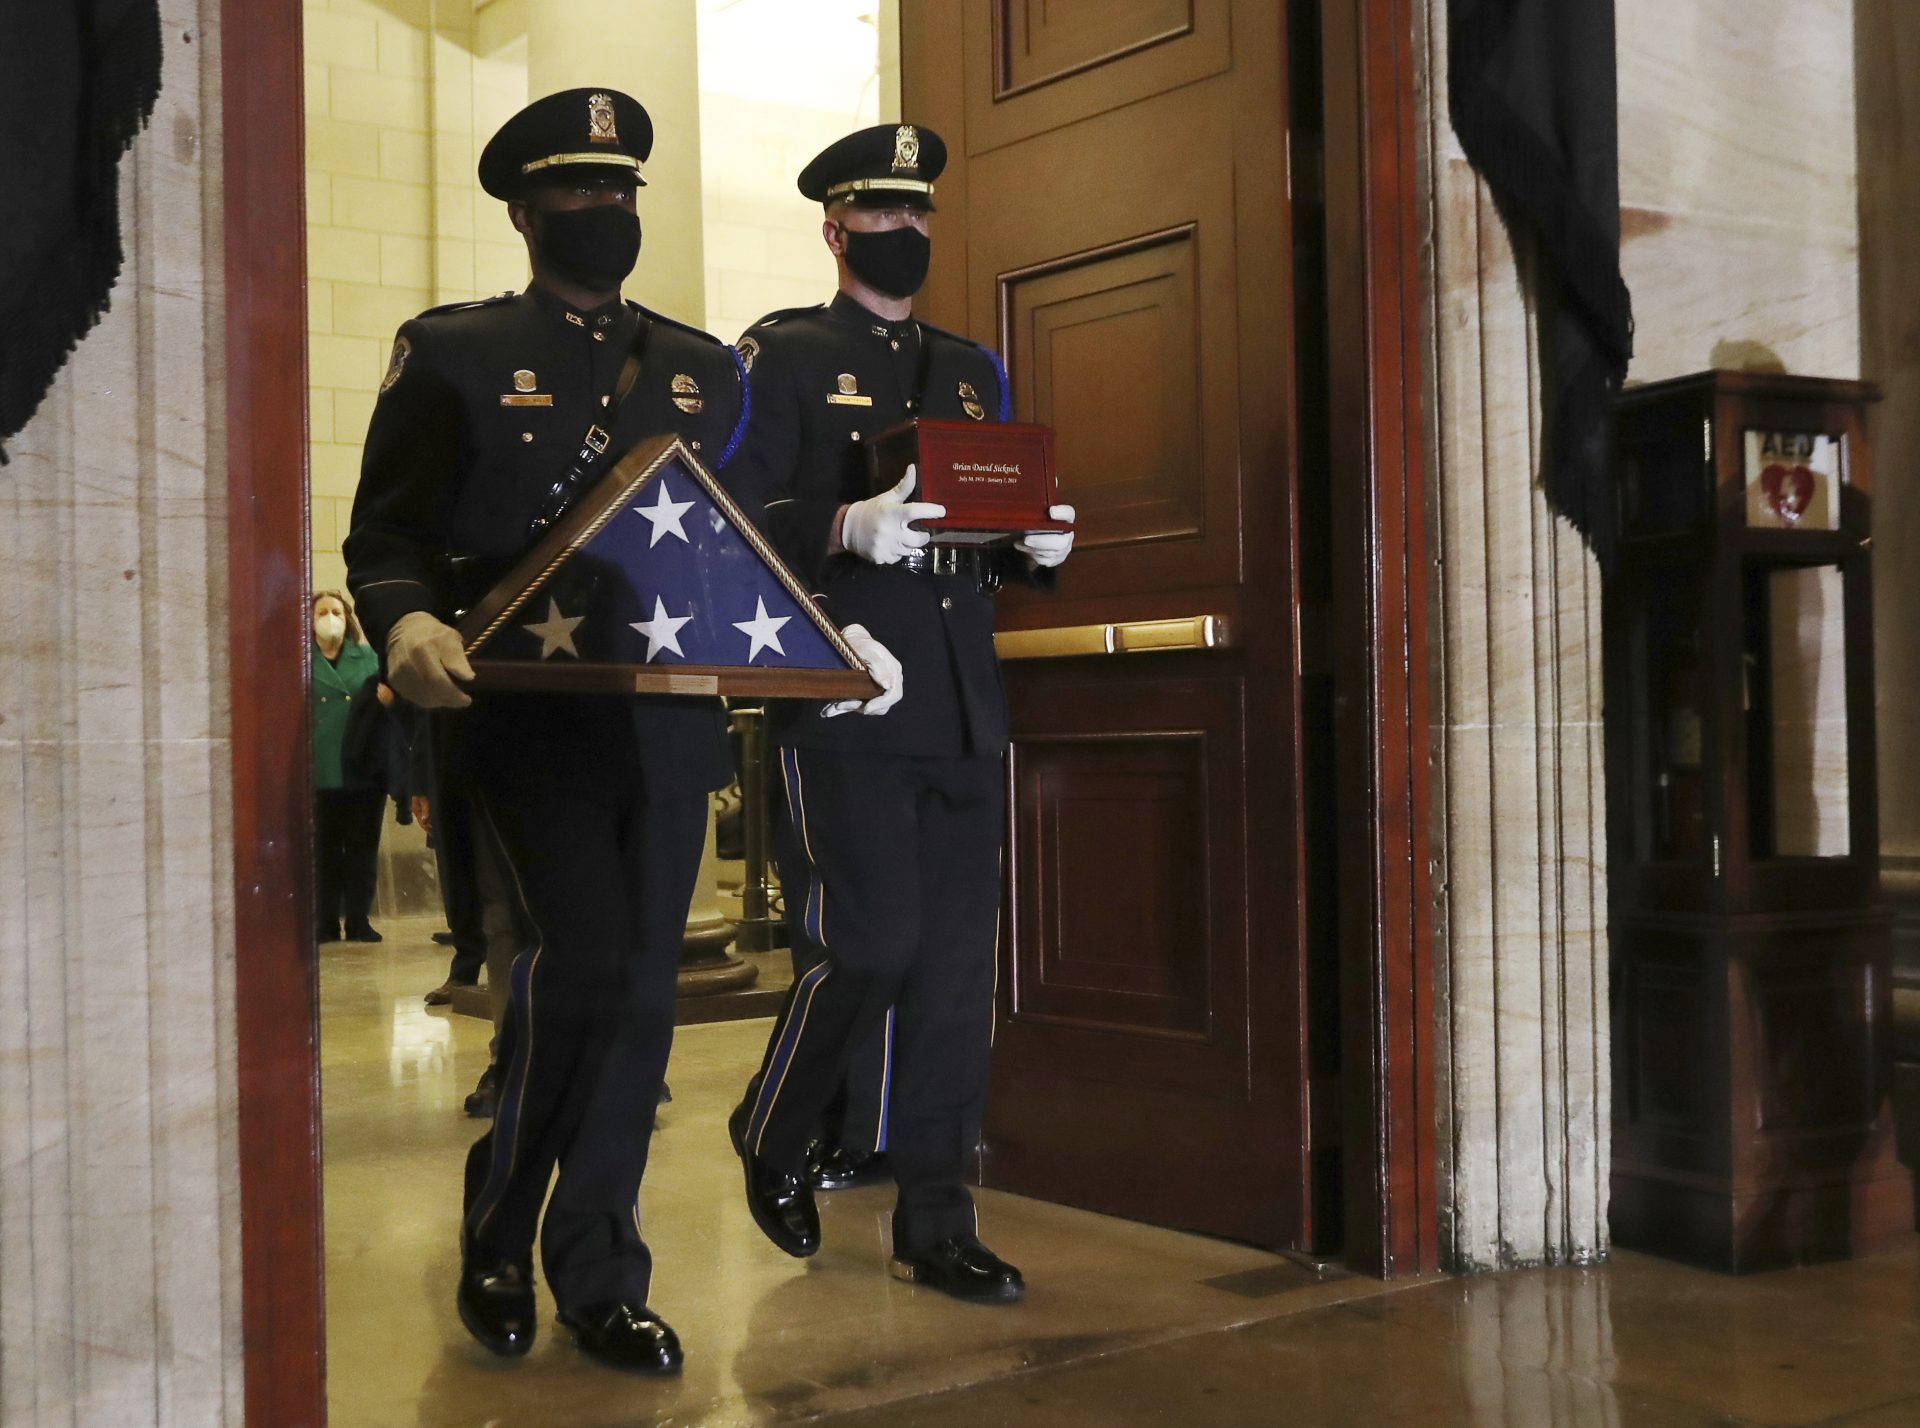 An honor guard carry an urn with the cremated remains of U.S. Capitol Police officer Brian Sicknick and a folded flag into the Capitol Rotunda to lie in honor Tuesday, Feb. 2, 2021, in Washington.